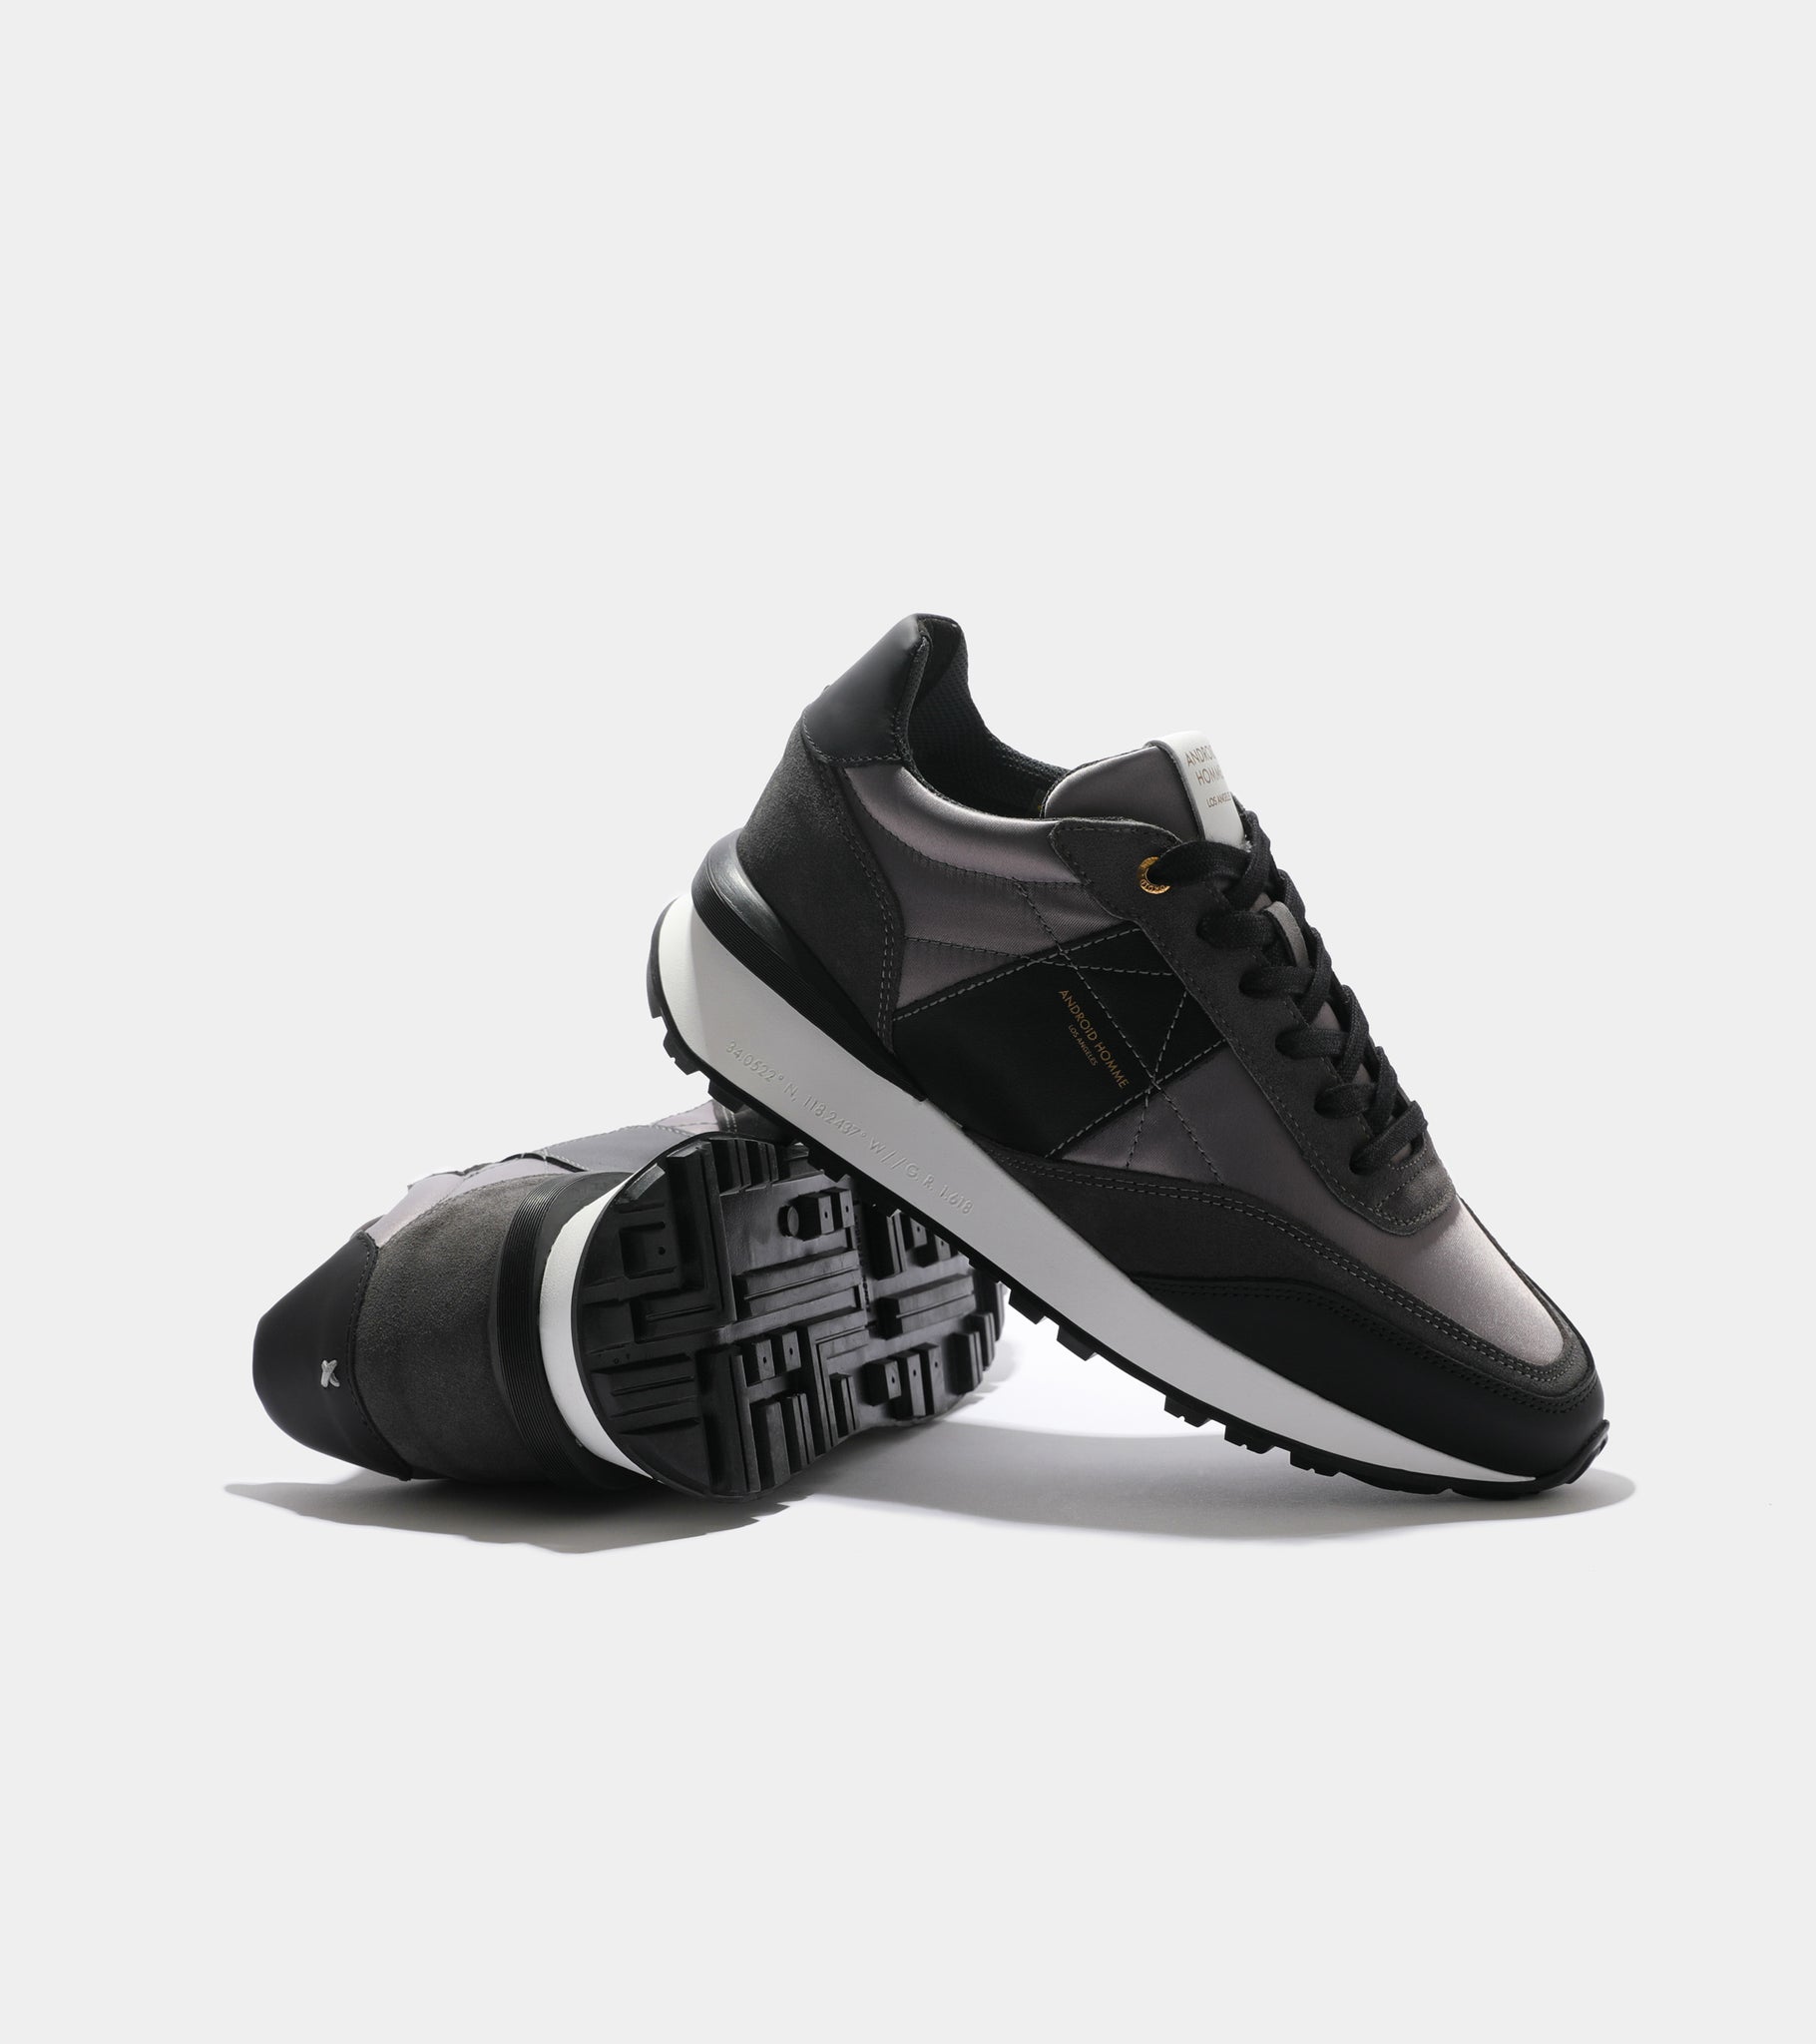 Ecom imagery of the Marina Del Rey Grey Nylon Black Suede Android Homme Trainers.